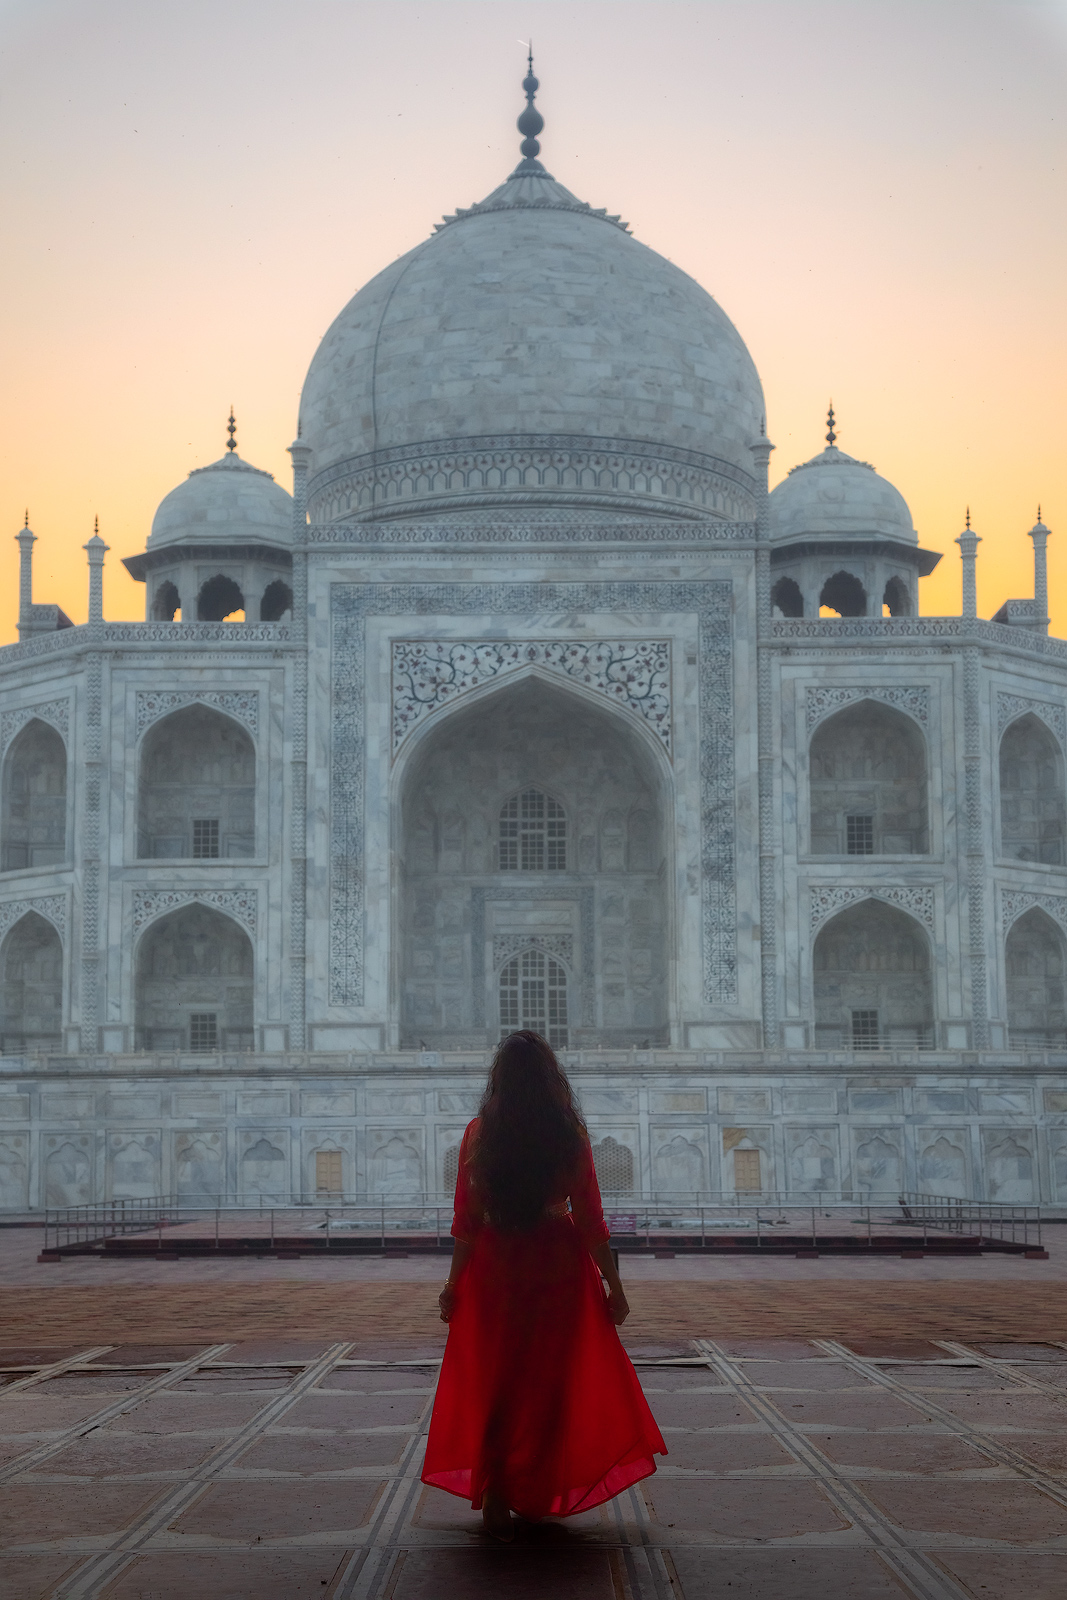 A beautiful girl in a red dress with a perfect morning view of the Taj Mahal.